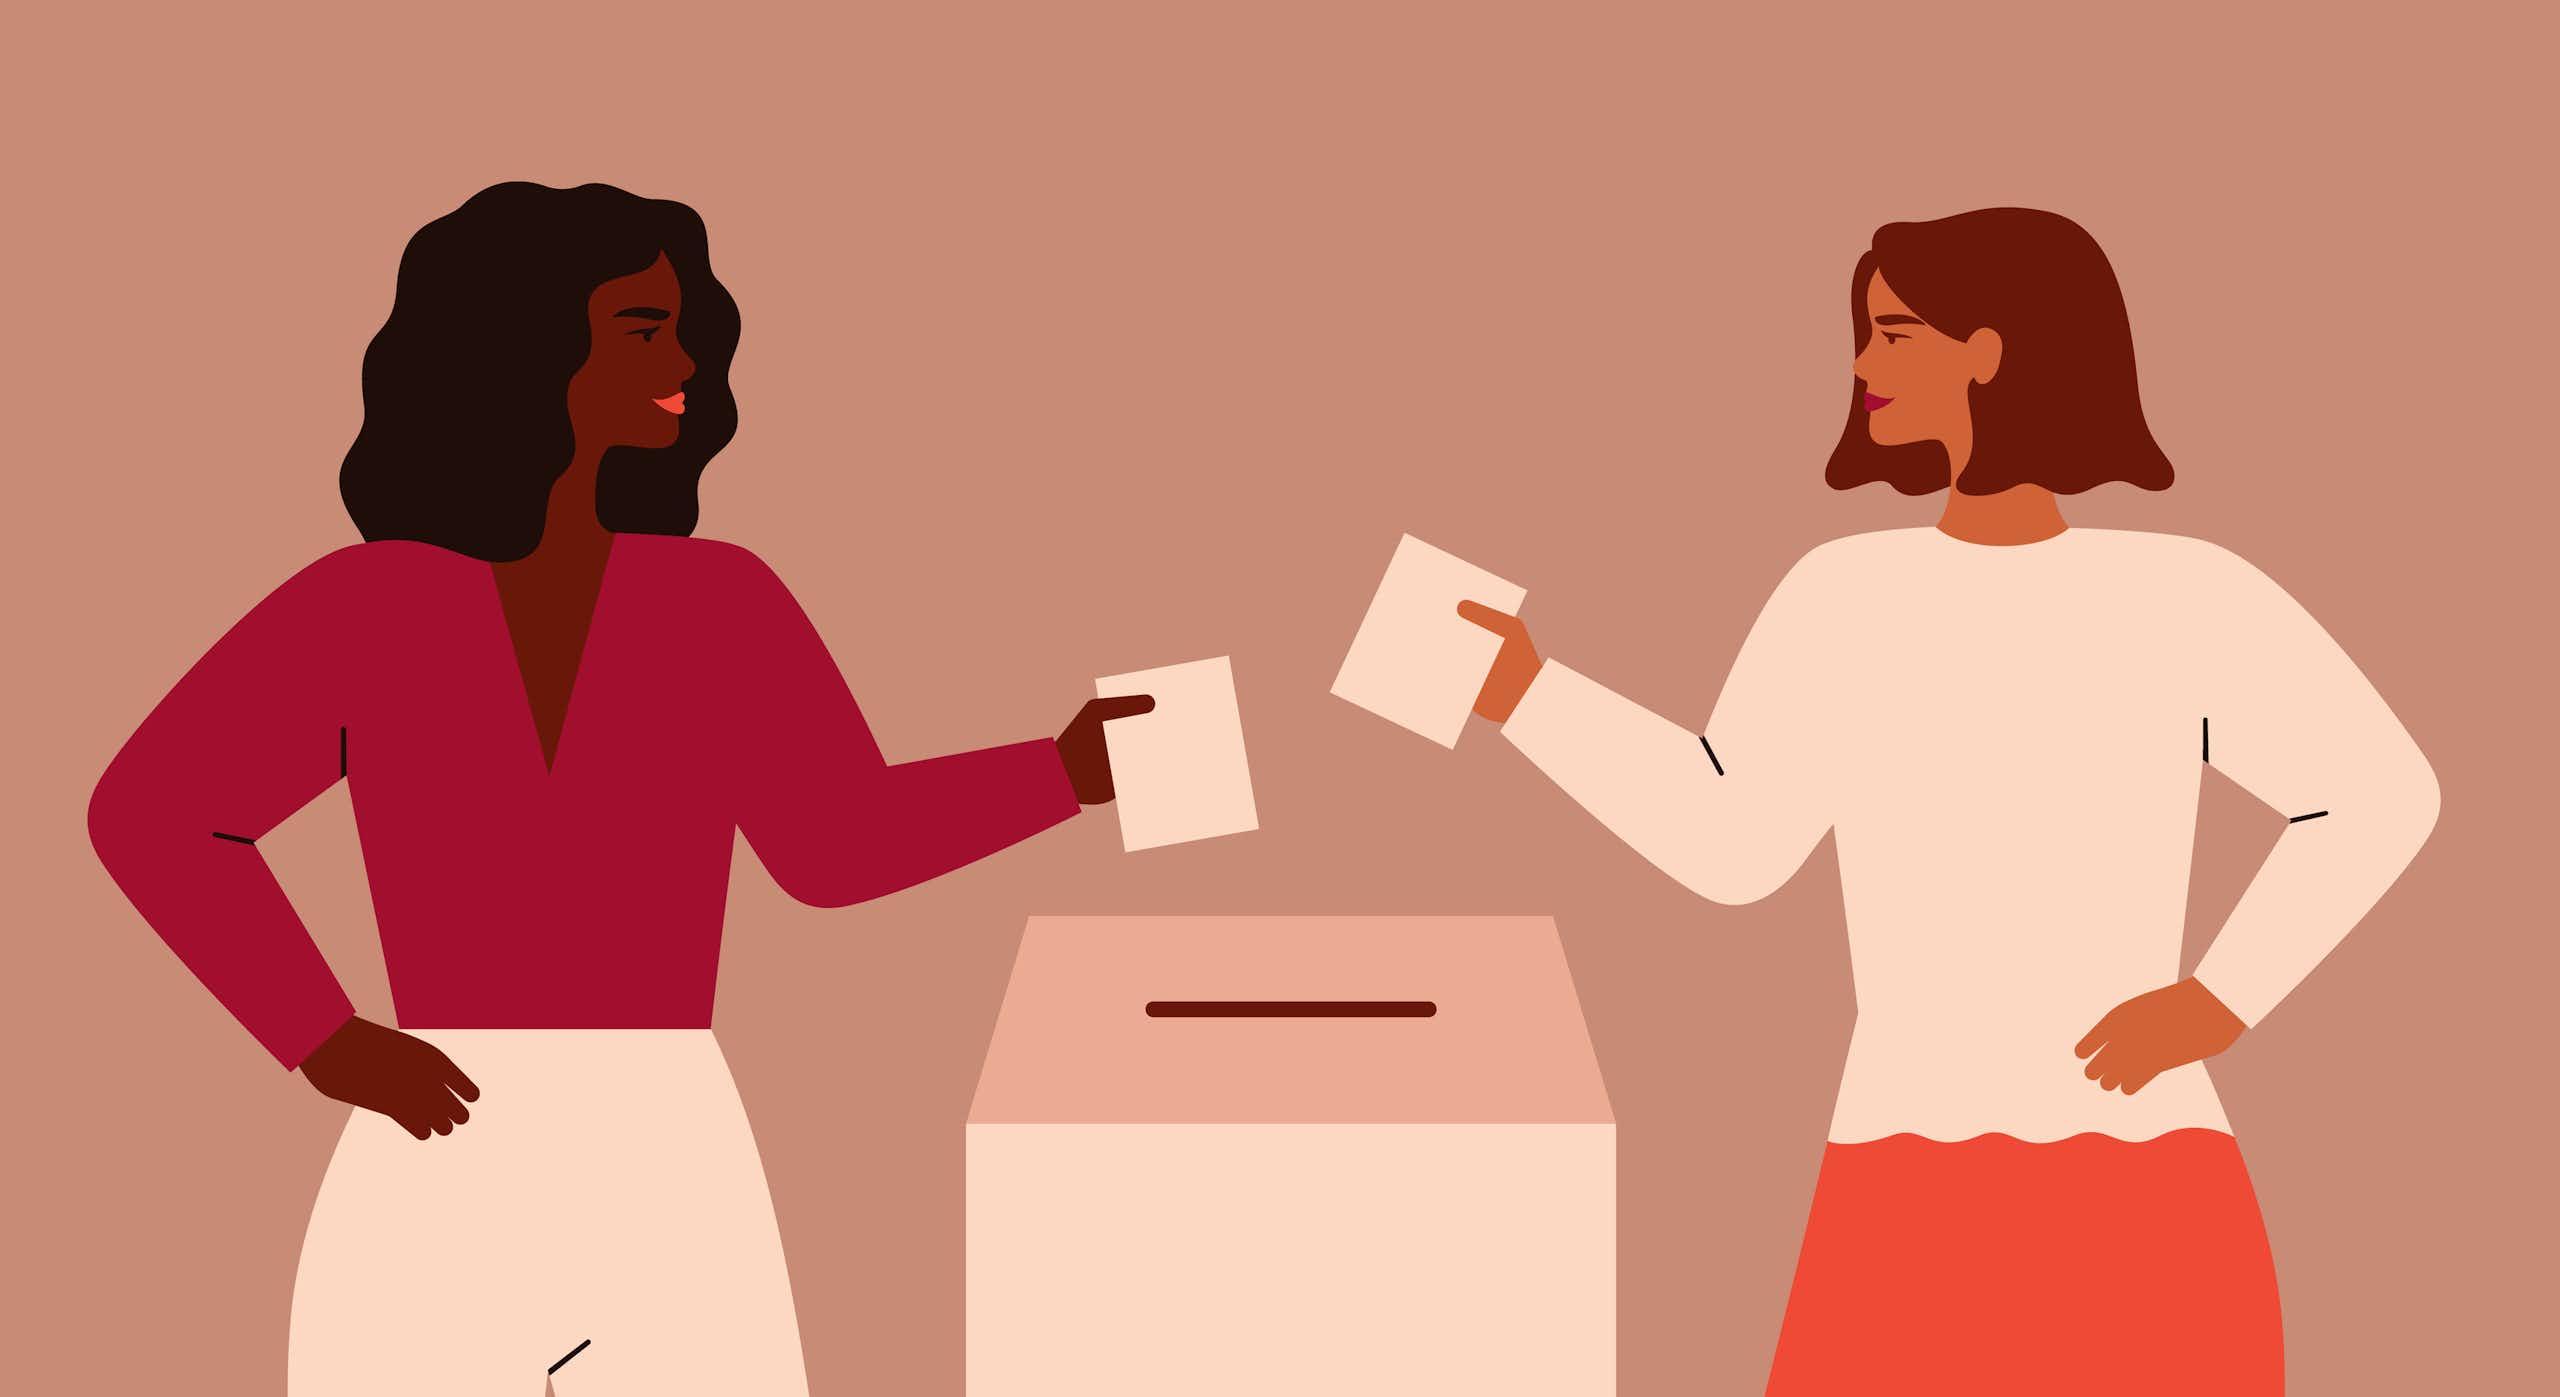 Illustration in pink and brown tones of two women placing ballots into a box